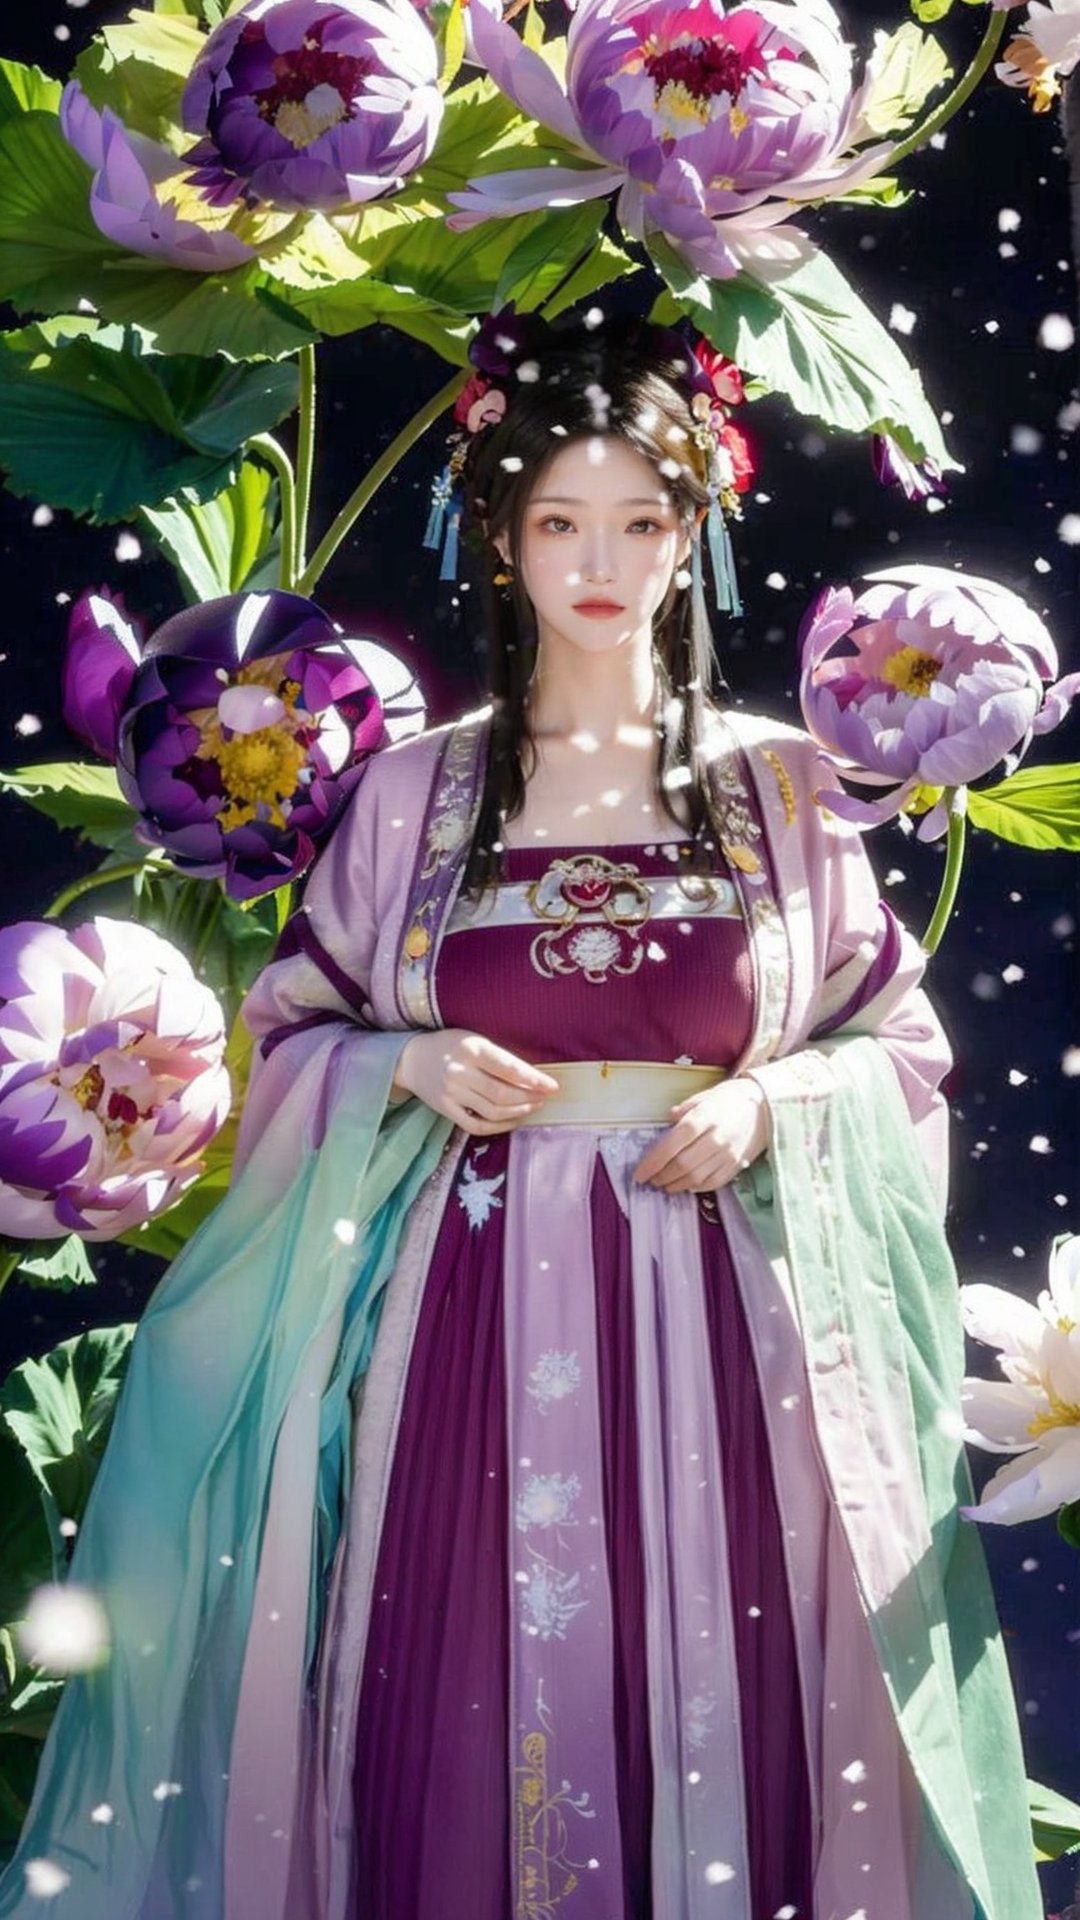 hanfu, Best Quality, masterpiece, (Snowing:1.5),1 girl, (long hair:1.2),  (big breasts:1.69),(Upper body photo:1.3),hanfu,18-year-old , exquisite , extreme face,creamy skin, fair skin,realistic skin details, (super-detail) , long hair, (big breasts:1.59),1girl,long skirt,long sleeves,(Peony flowers, plum blossoms:1.5),(flower:1.3,tangdynastyhanfu, hanfu2,myhanfu, chang,Sit on the steps, hands on hips